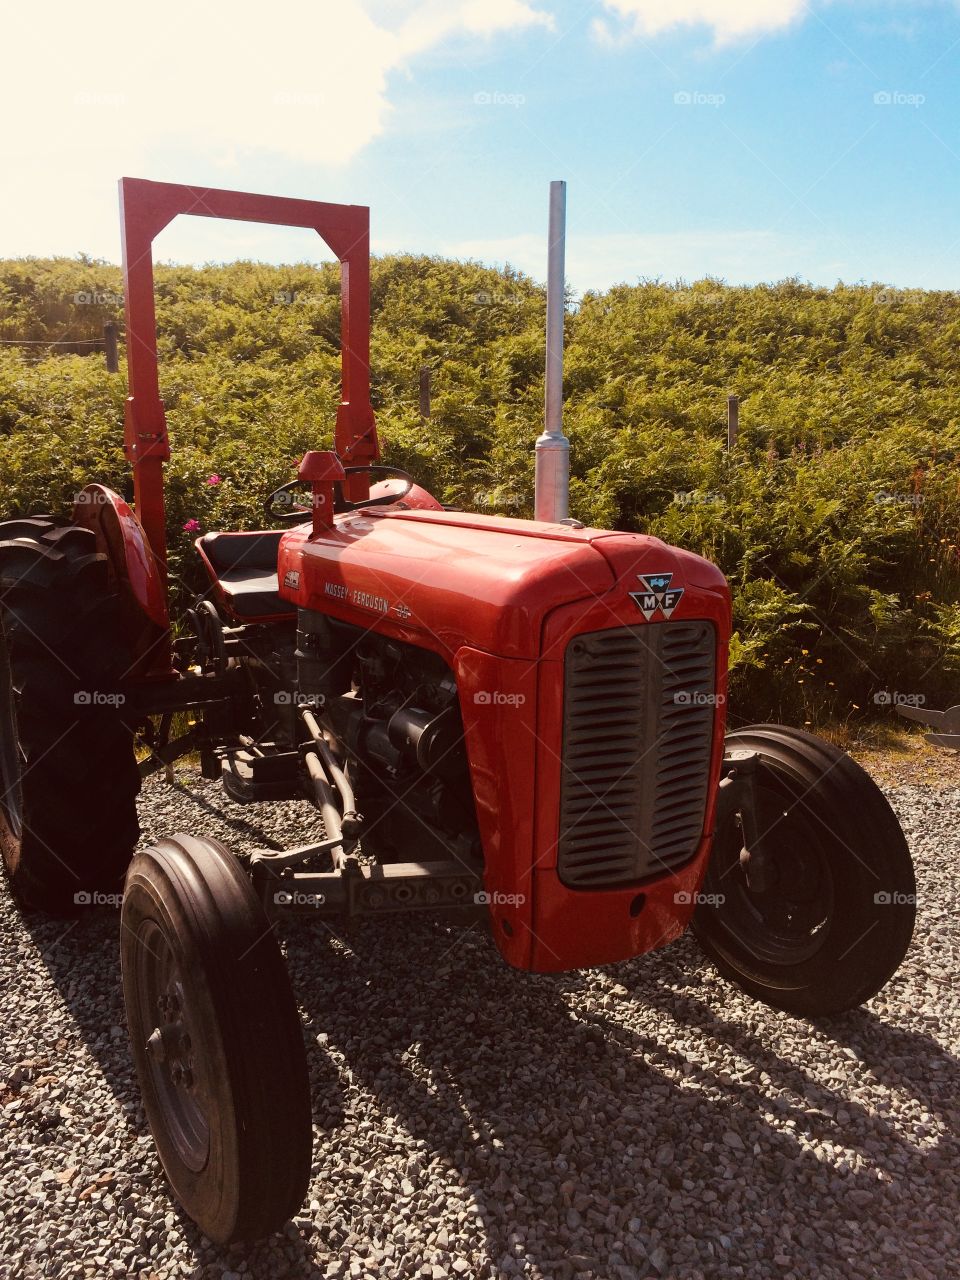 Vintage Tractor at the Lamb to Loom Exhibition in the Minginish Hall on the Isle of Skye in Northwest Scotland - July 2018